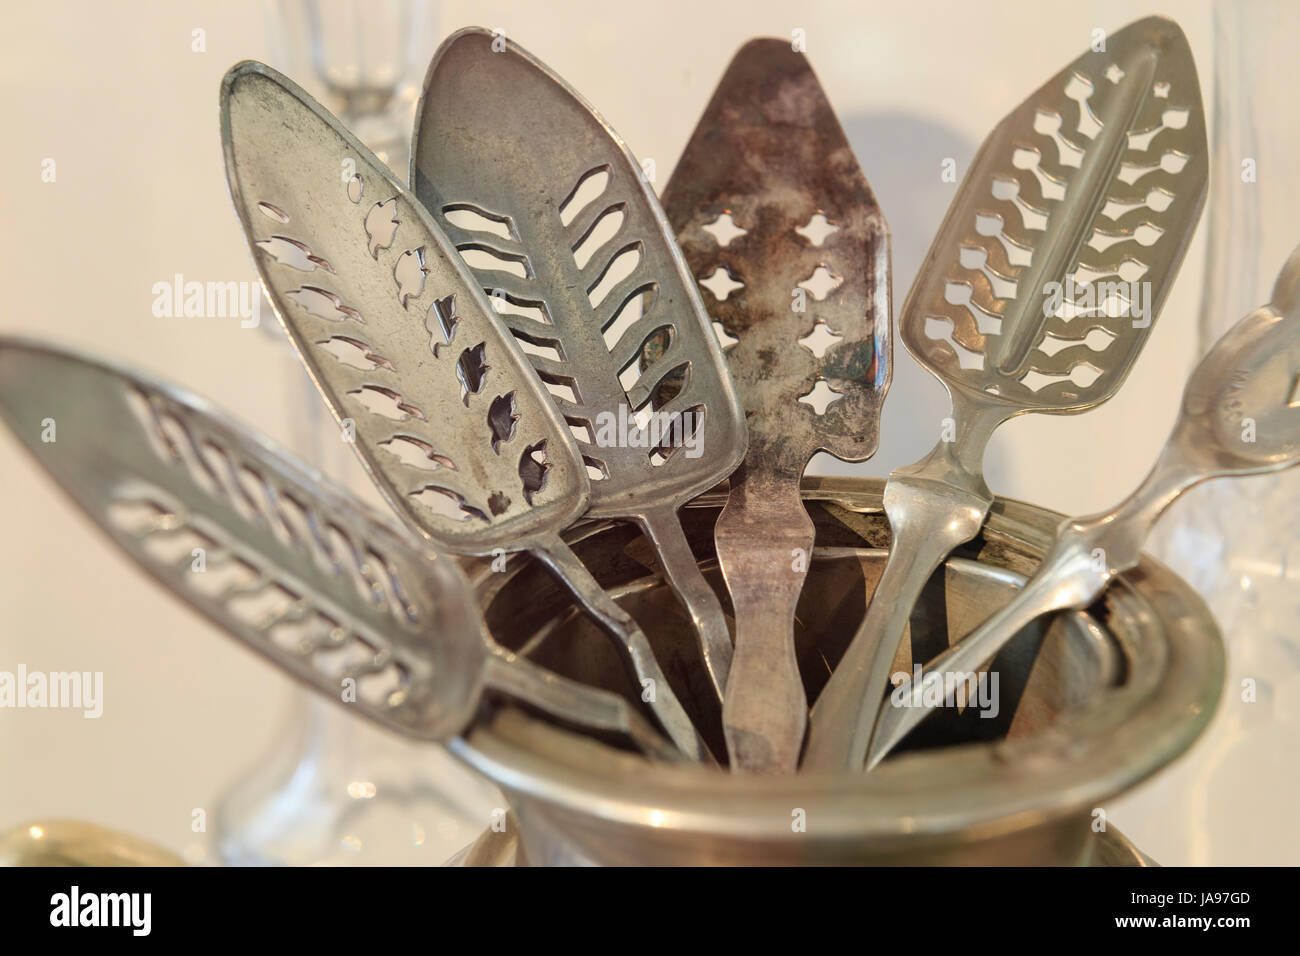 France, Franche Comte, Pontarlier, Museum of Pontarlier, absinthe spoons Stock Photo